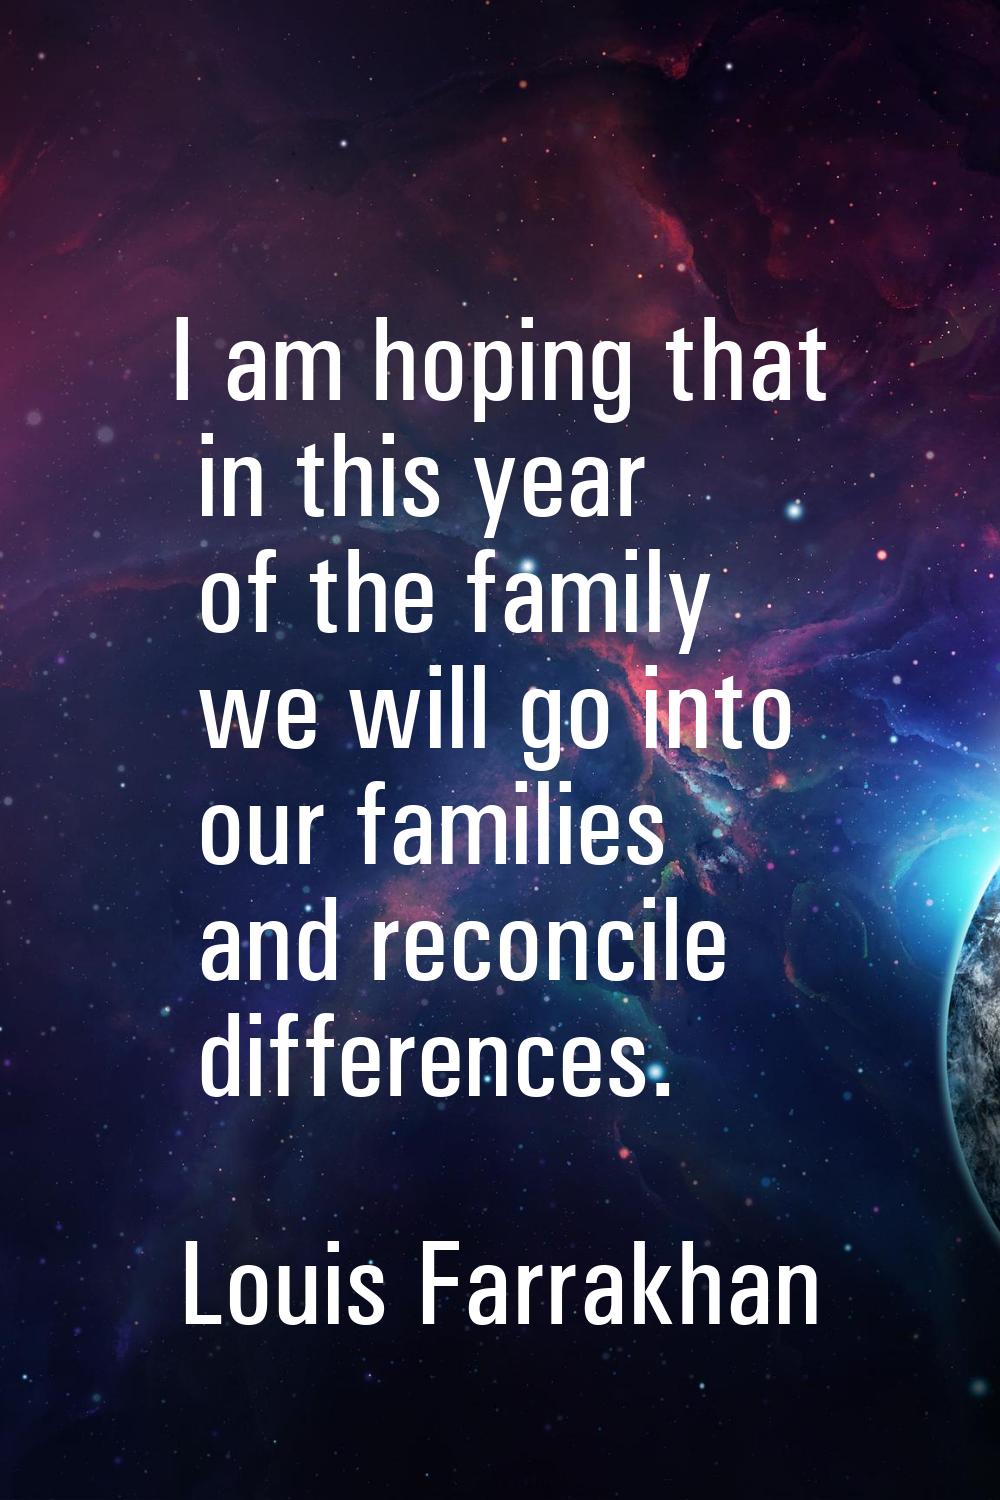 I am hoping that in this year of the family we will go into our families and reconcile differences.